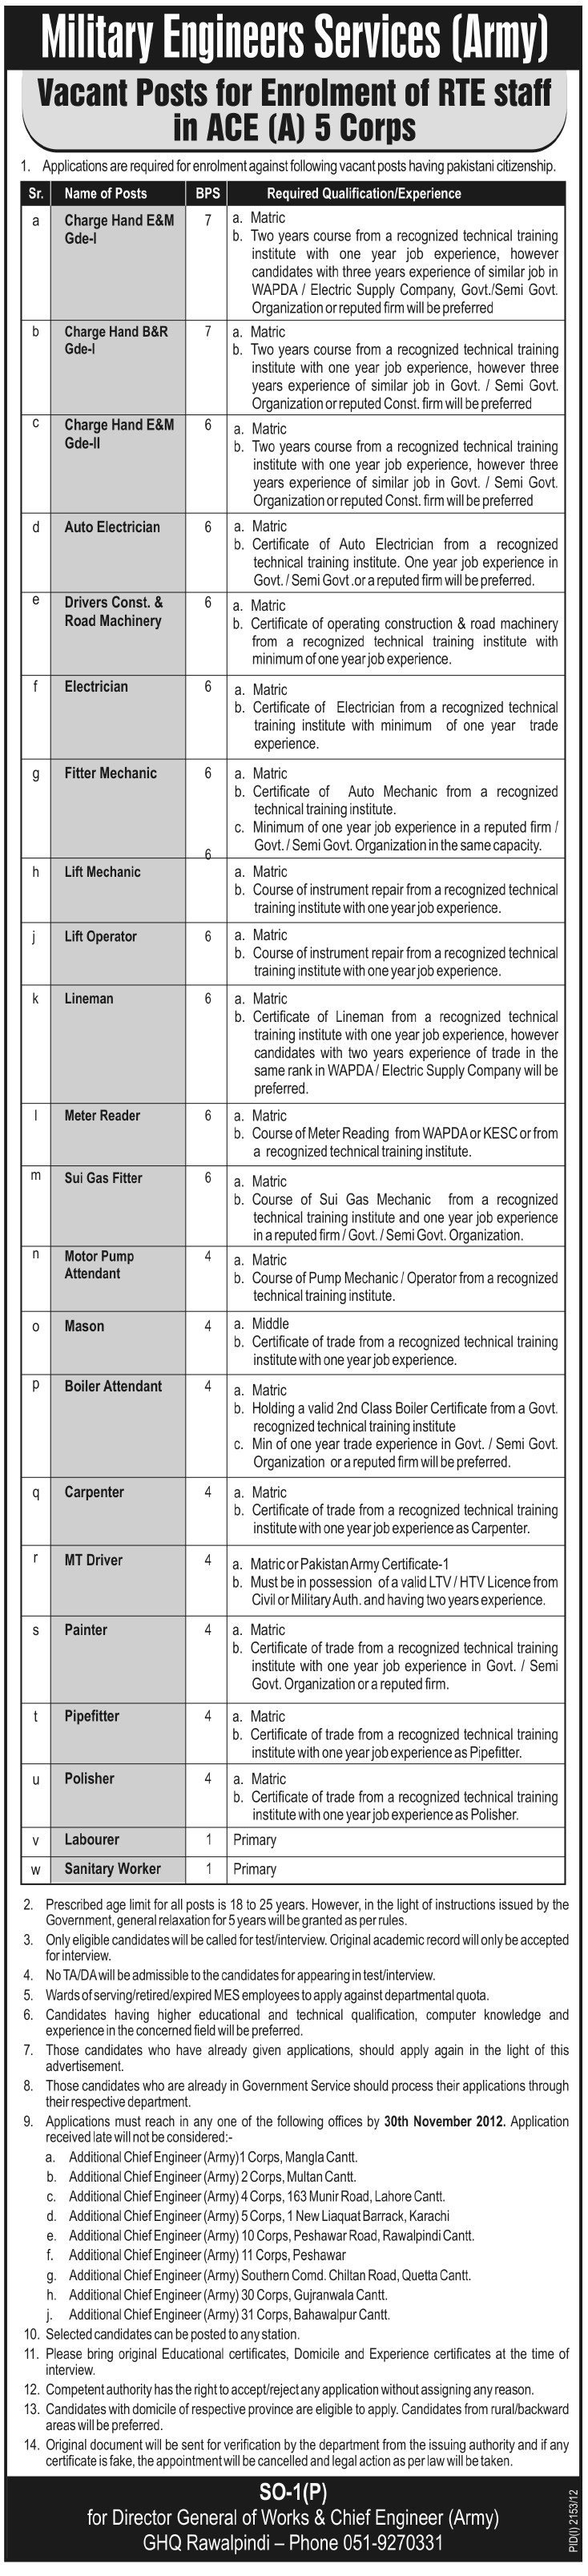 Military Engineers Services Army Jobs 2012 Army MES